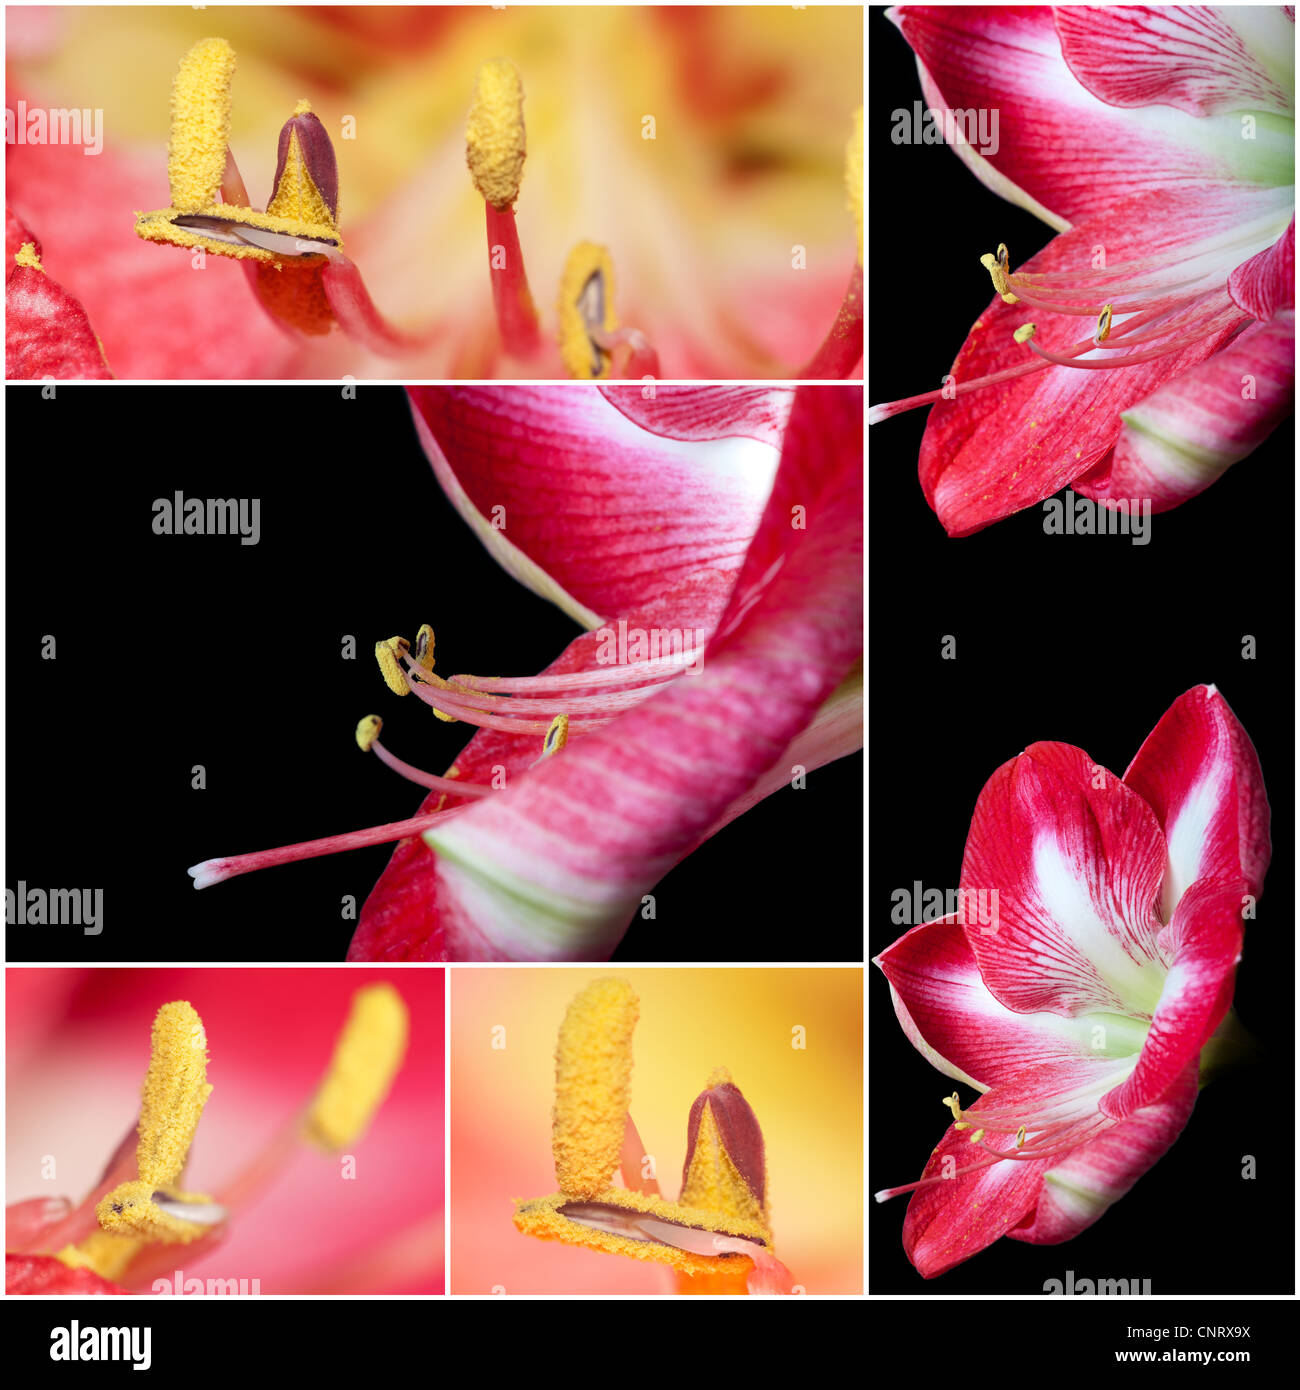 Collage of Extreme close up view of a amaryllis flower temple Stock Photo